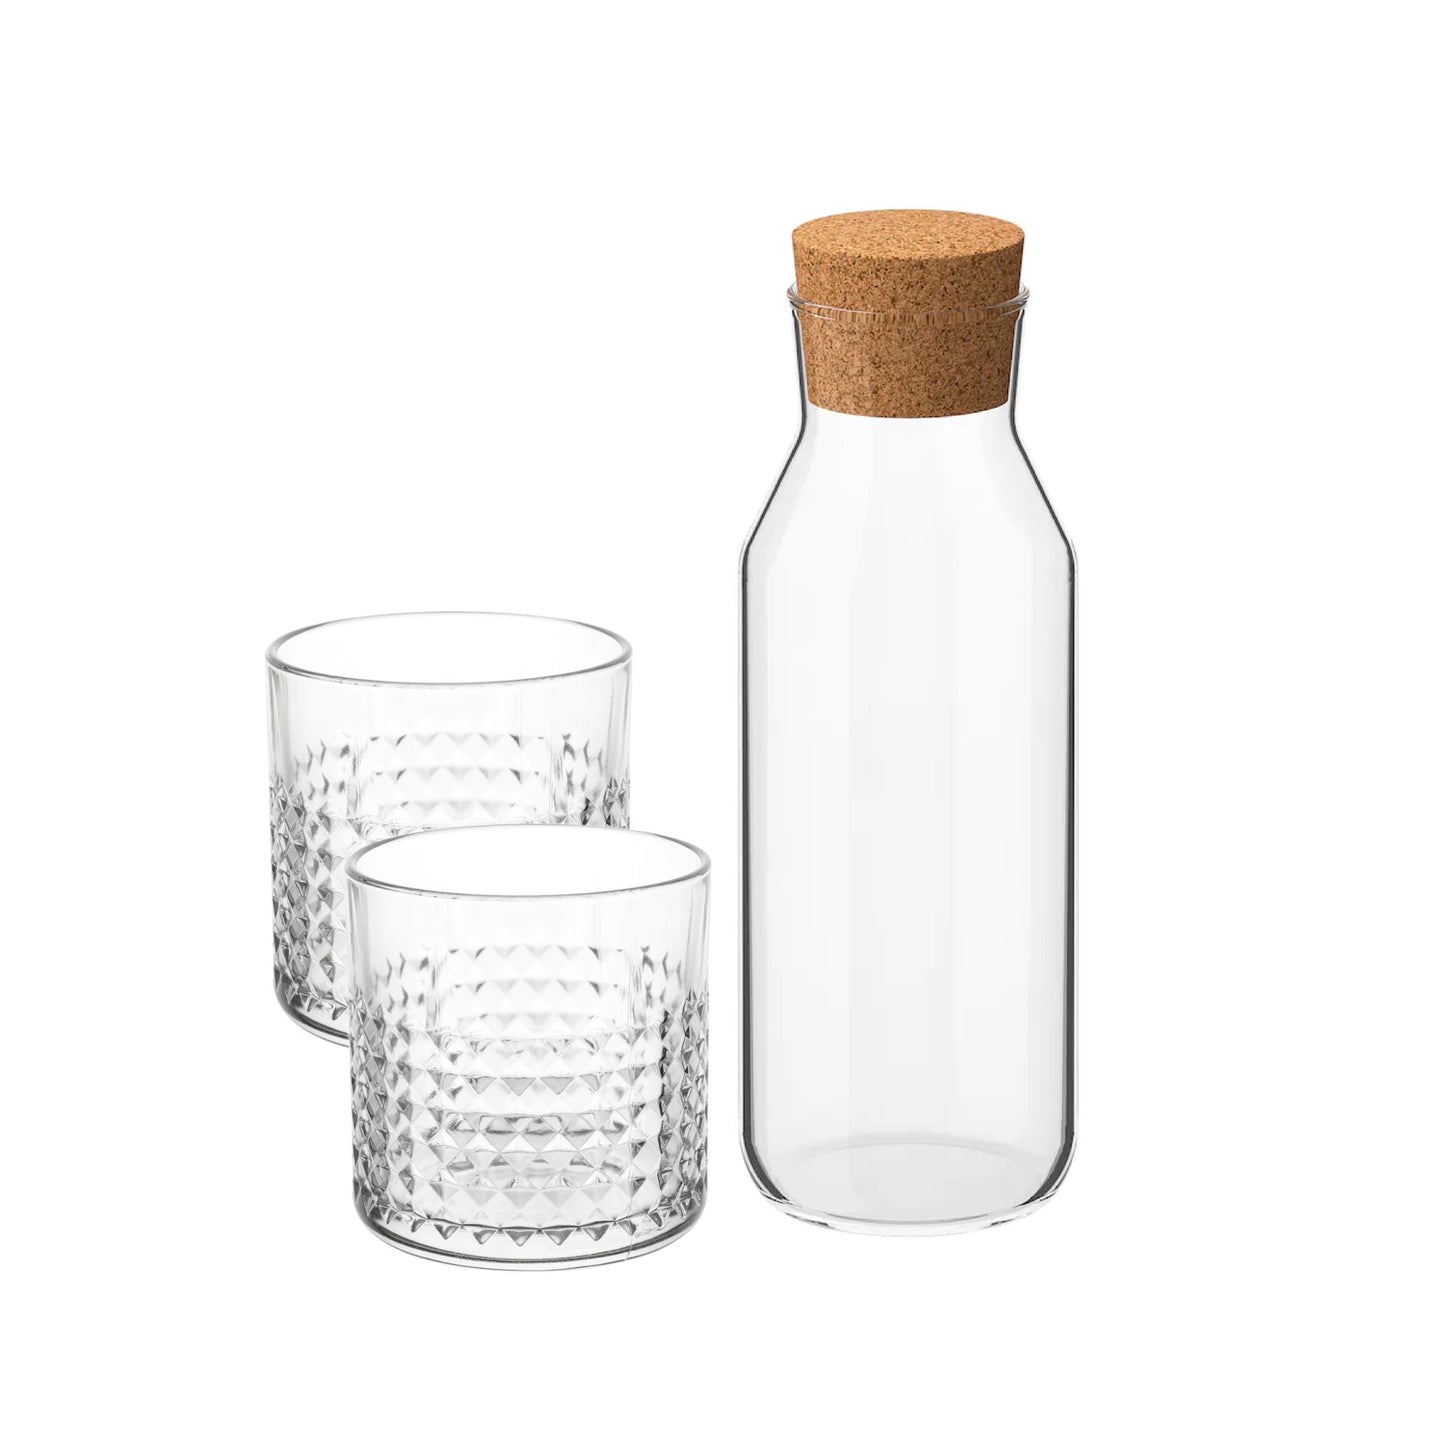 IKEA 365+/FRASERA Carafe with stopper, 0.5 l/2 Glass, clear glass 30 cl